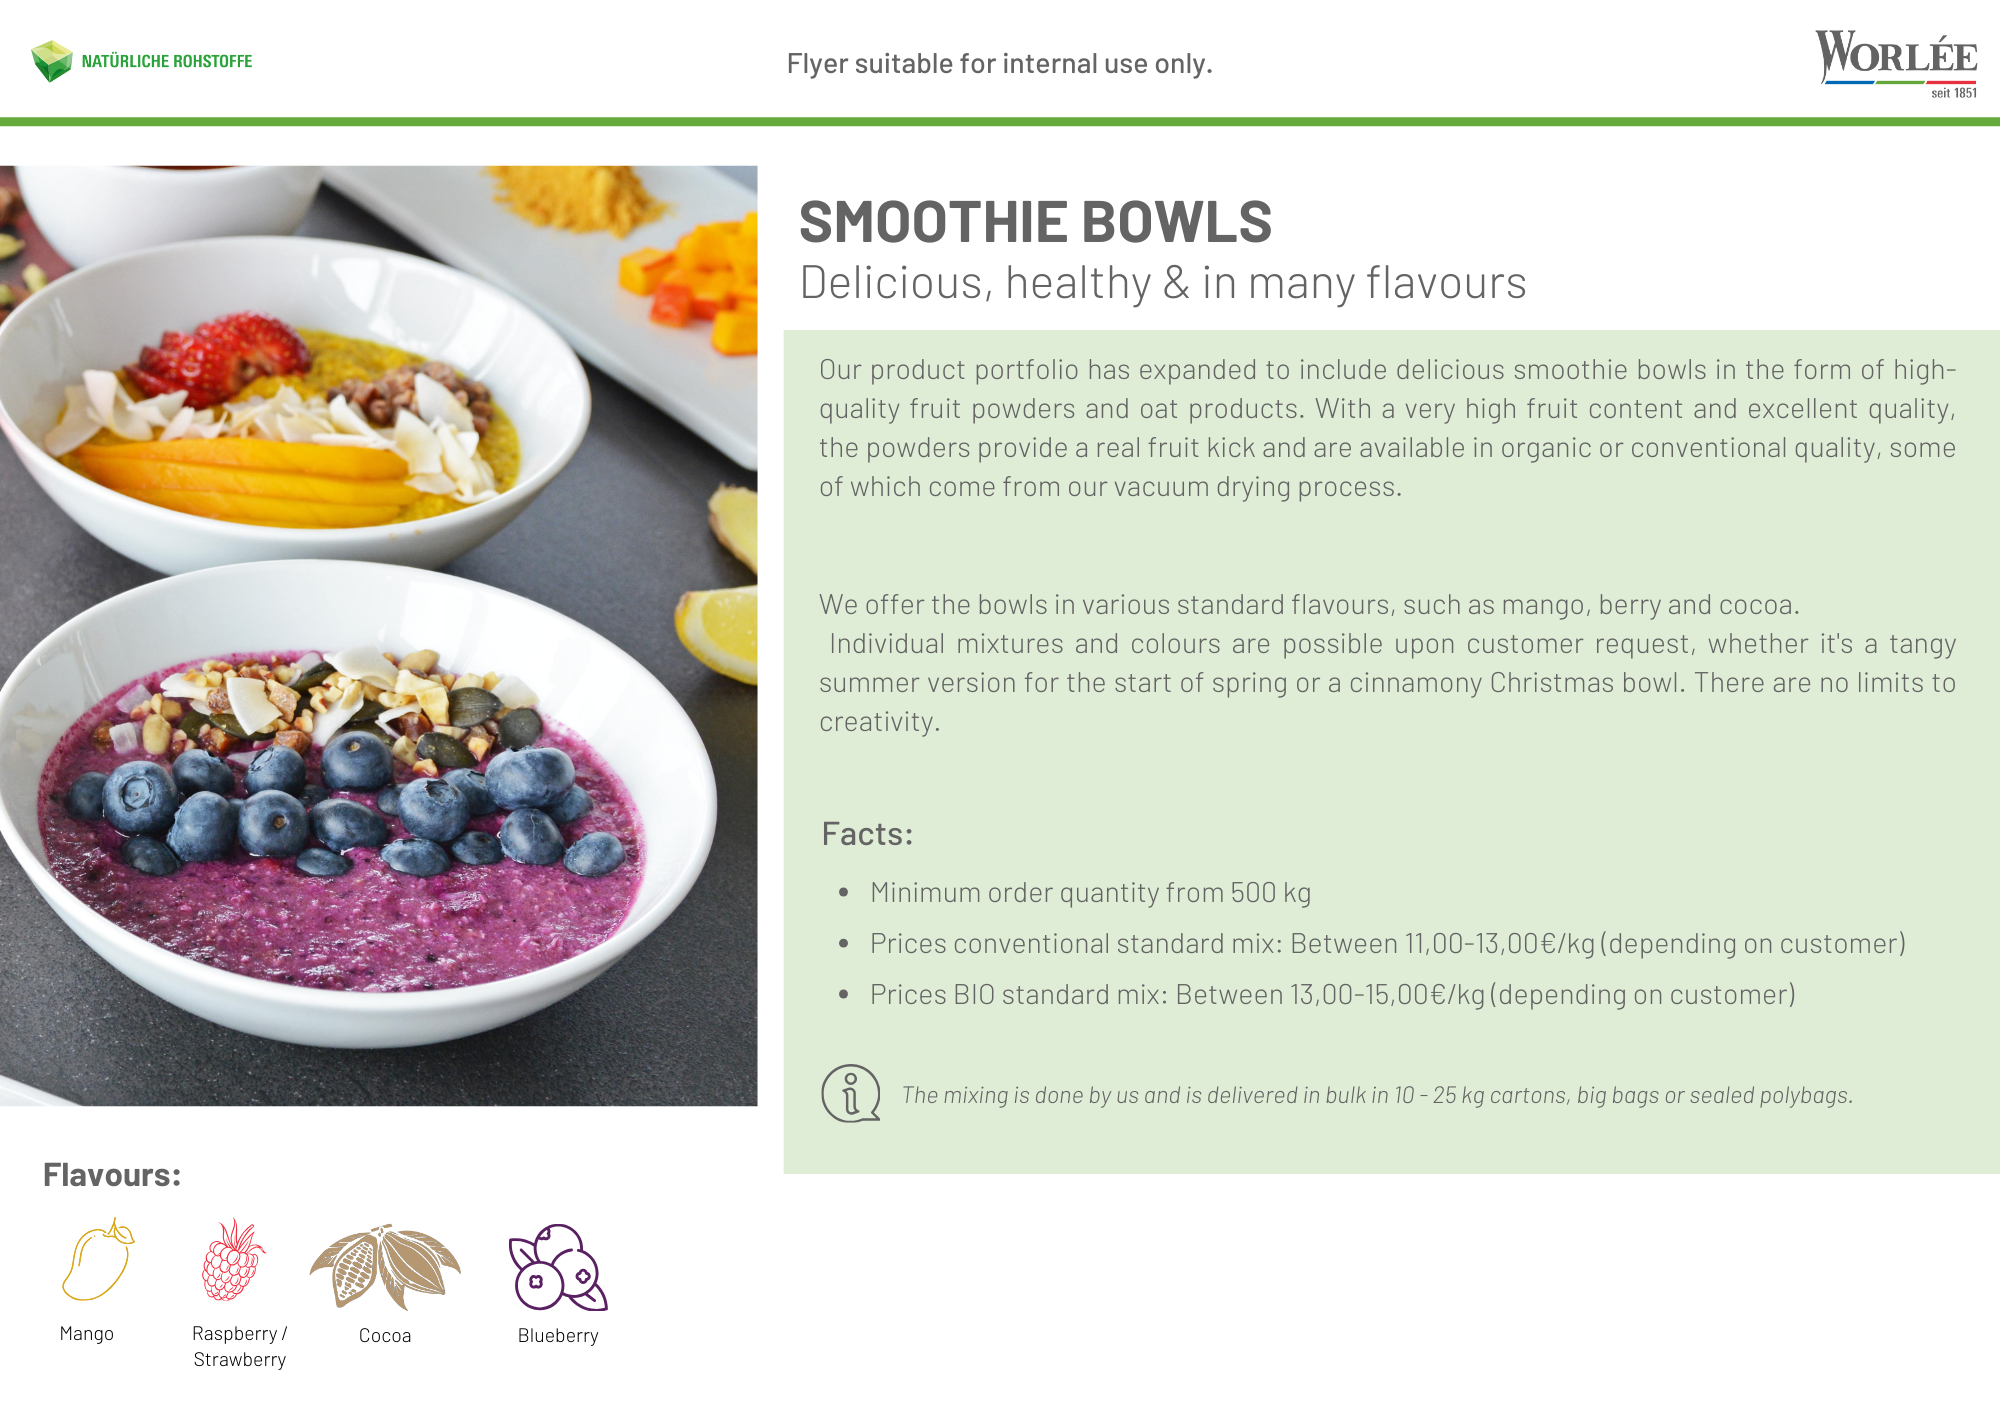 WNP Flyer Smoothie Bowls